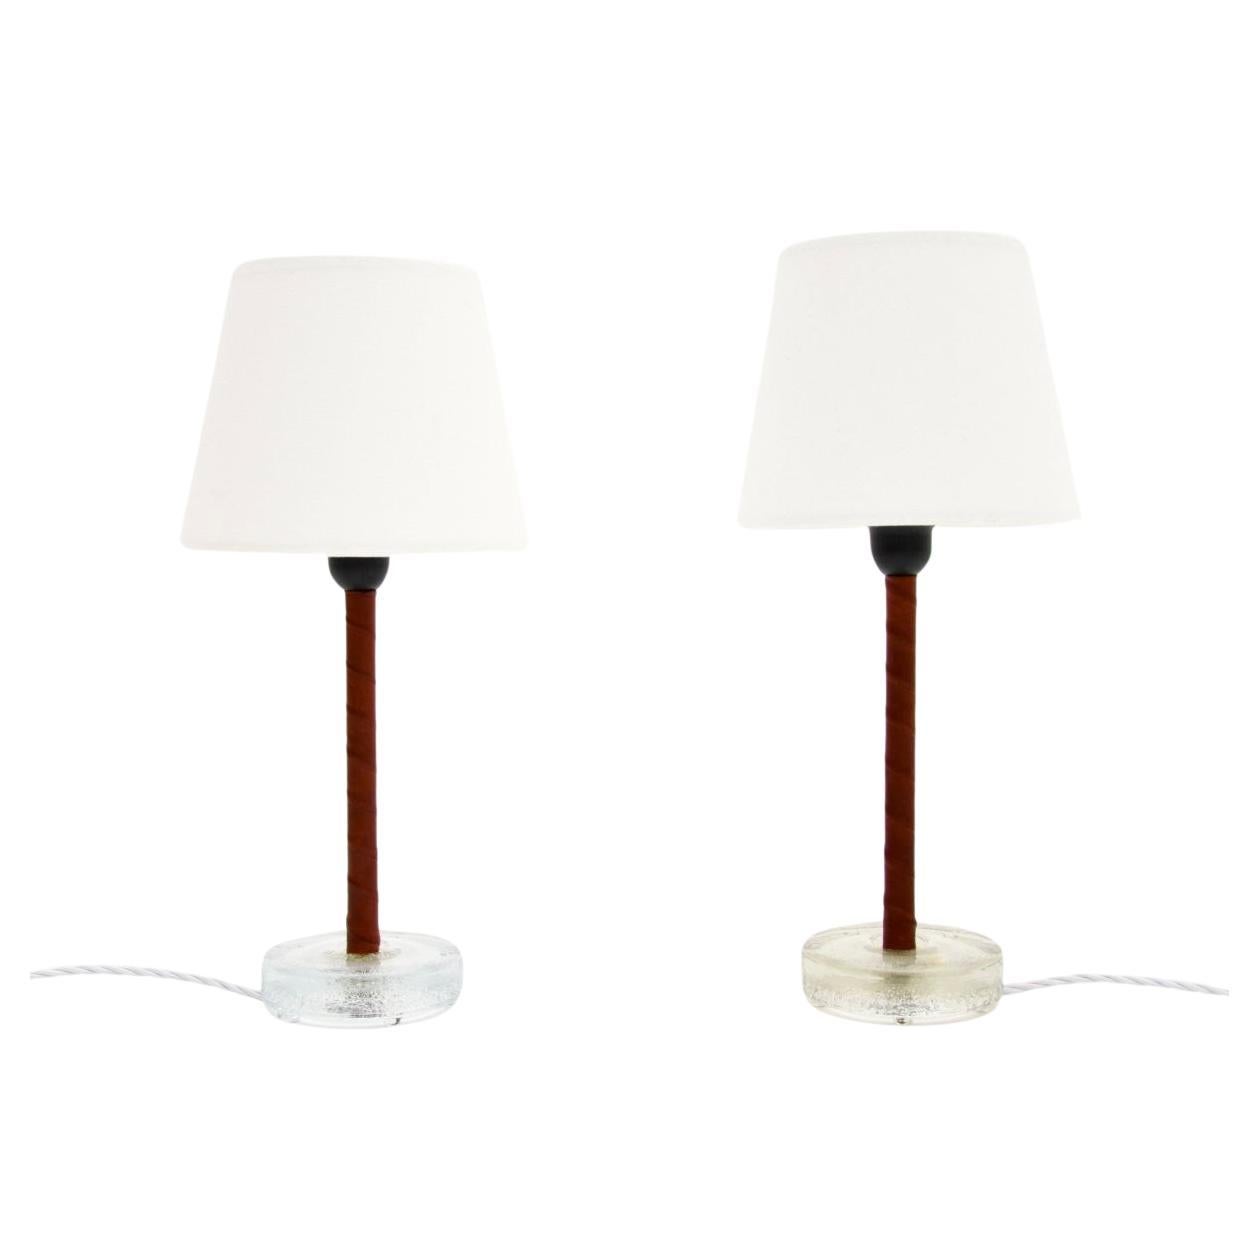 Pair of Vintage Swedish Leather Bound Table Lamps